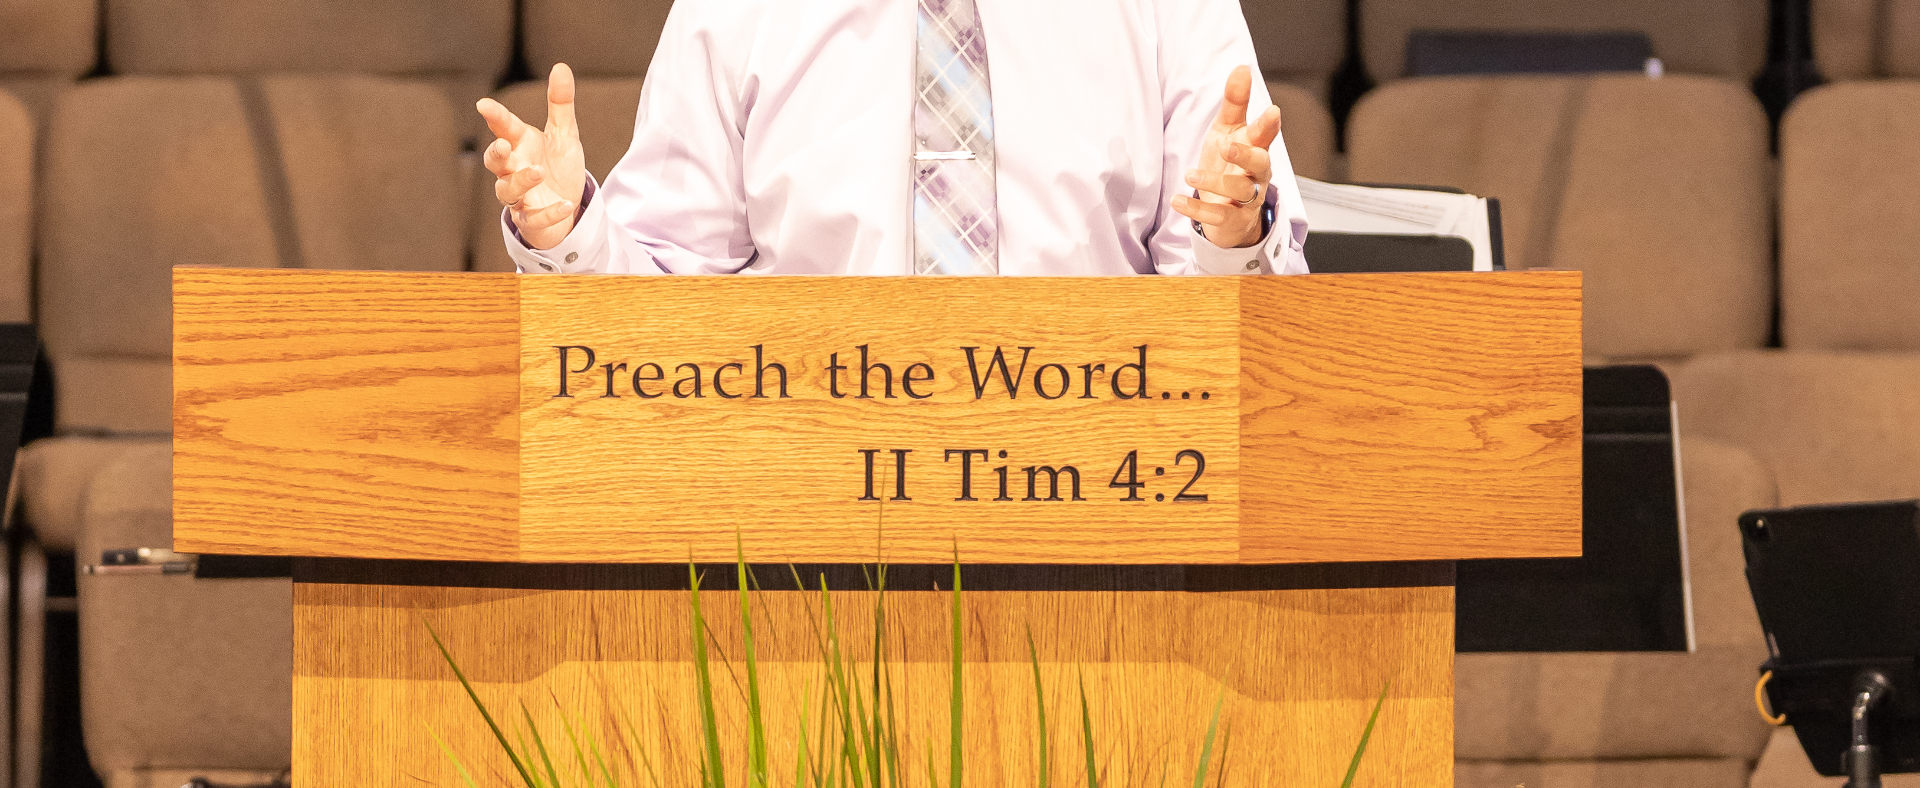 Pulpit. Expositional Preaching explained